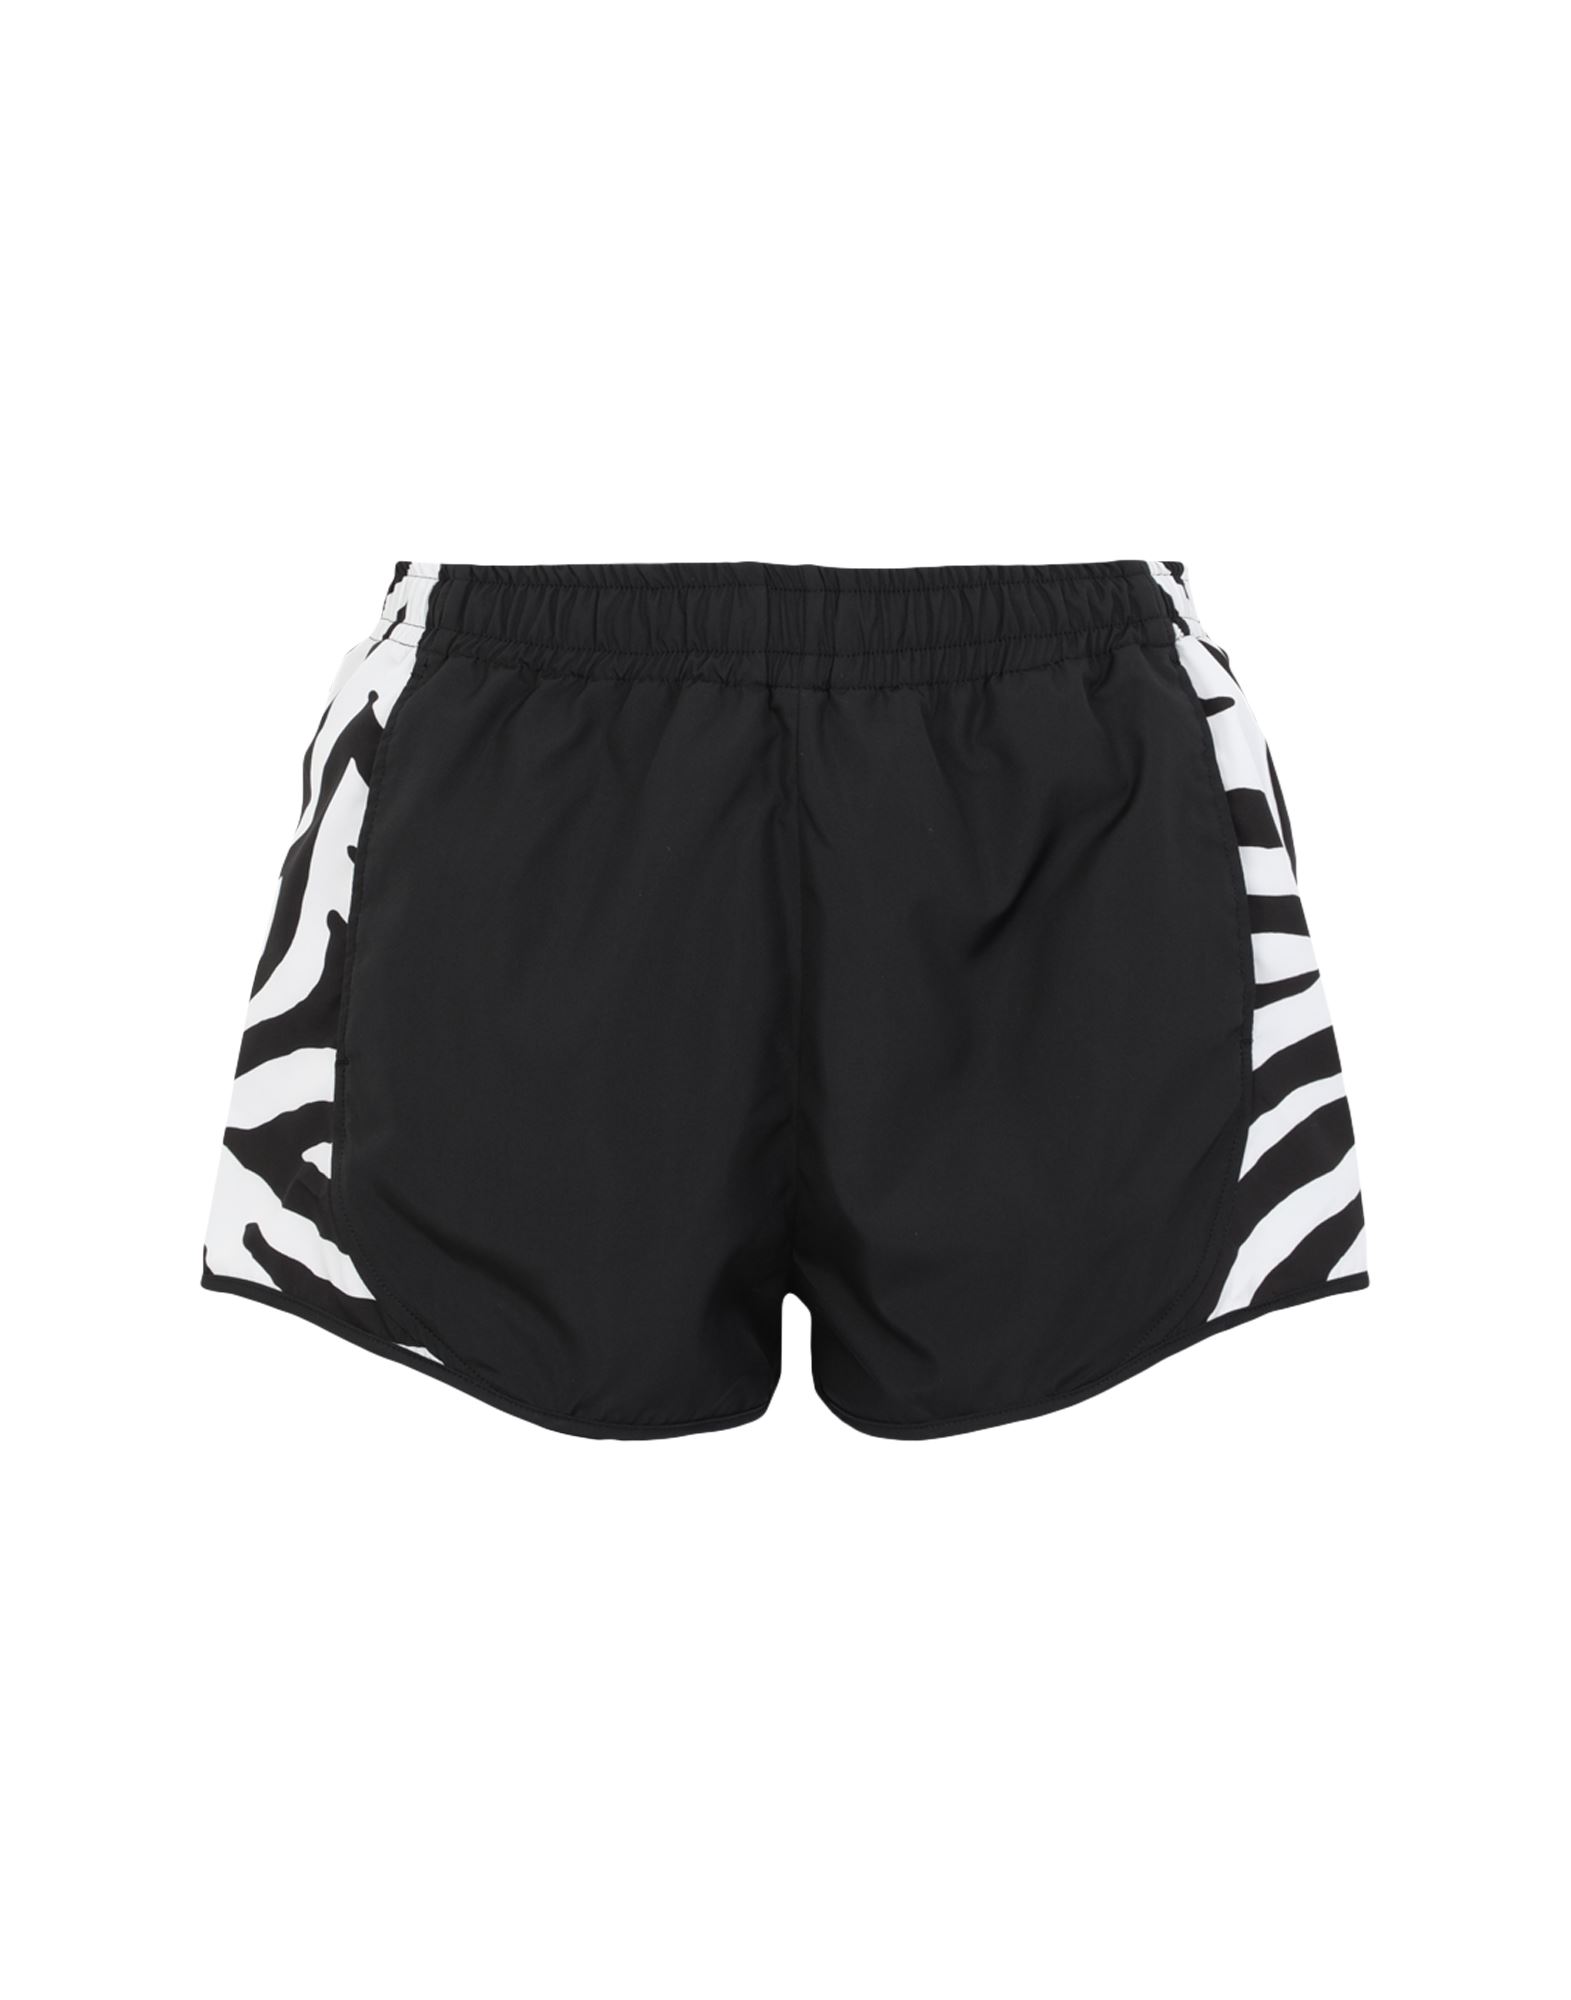 Shop Redemption Athletix Woman Shorts & Bermuda Shorts Black Size M Recycled Polyester